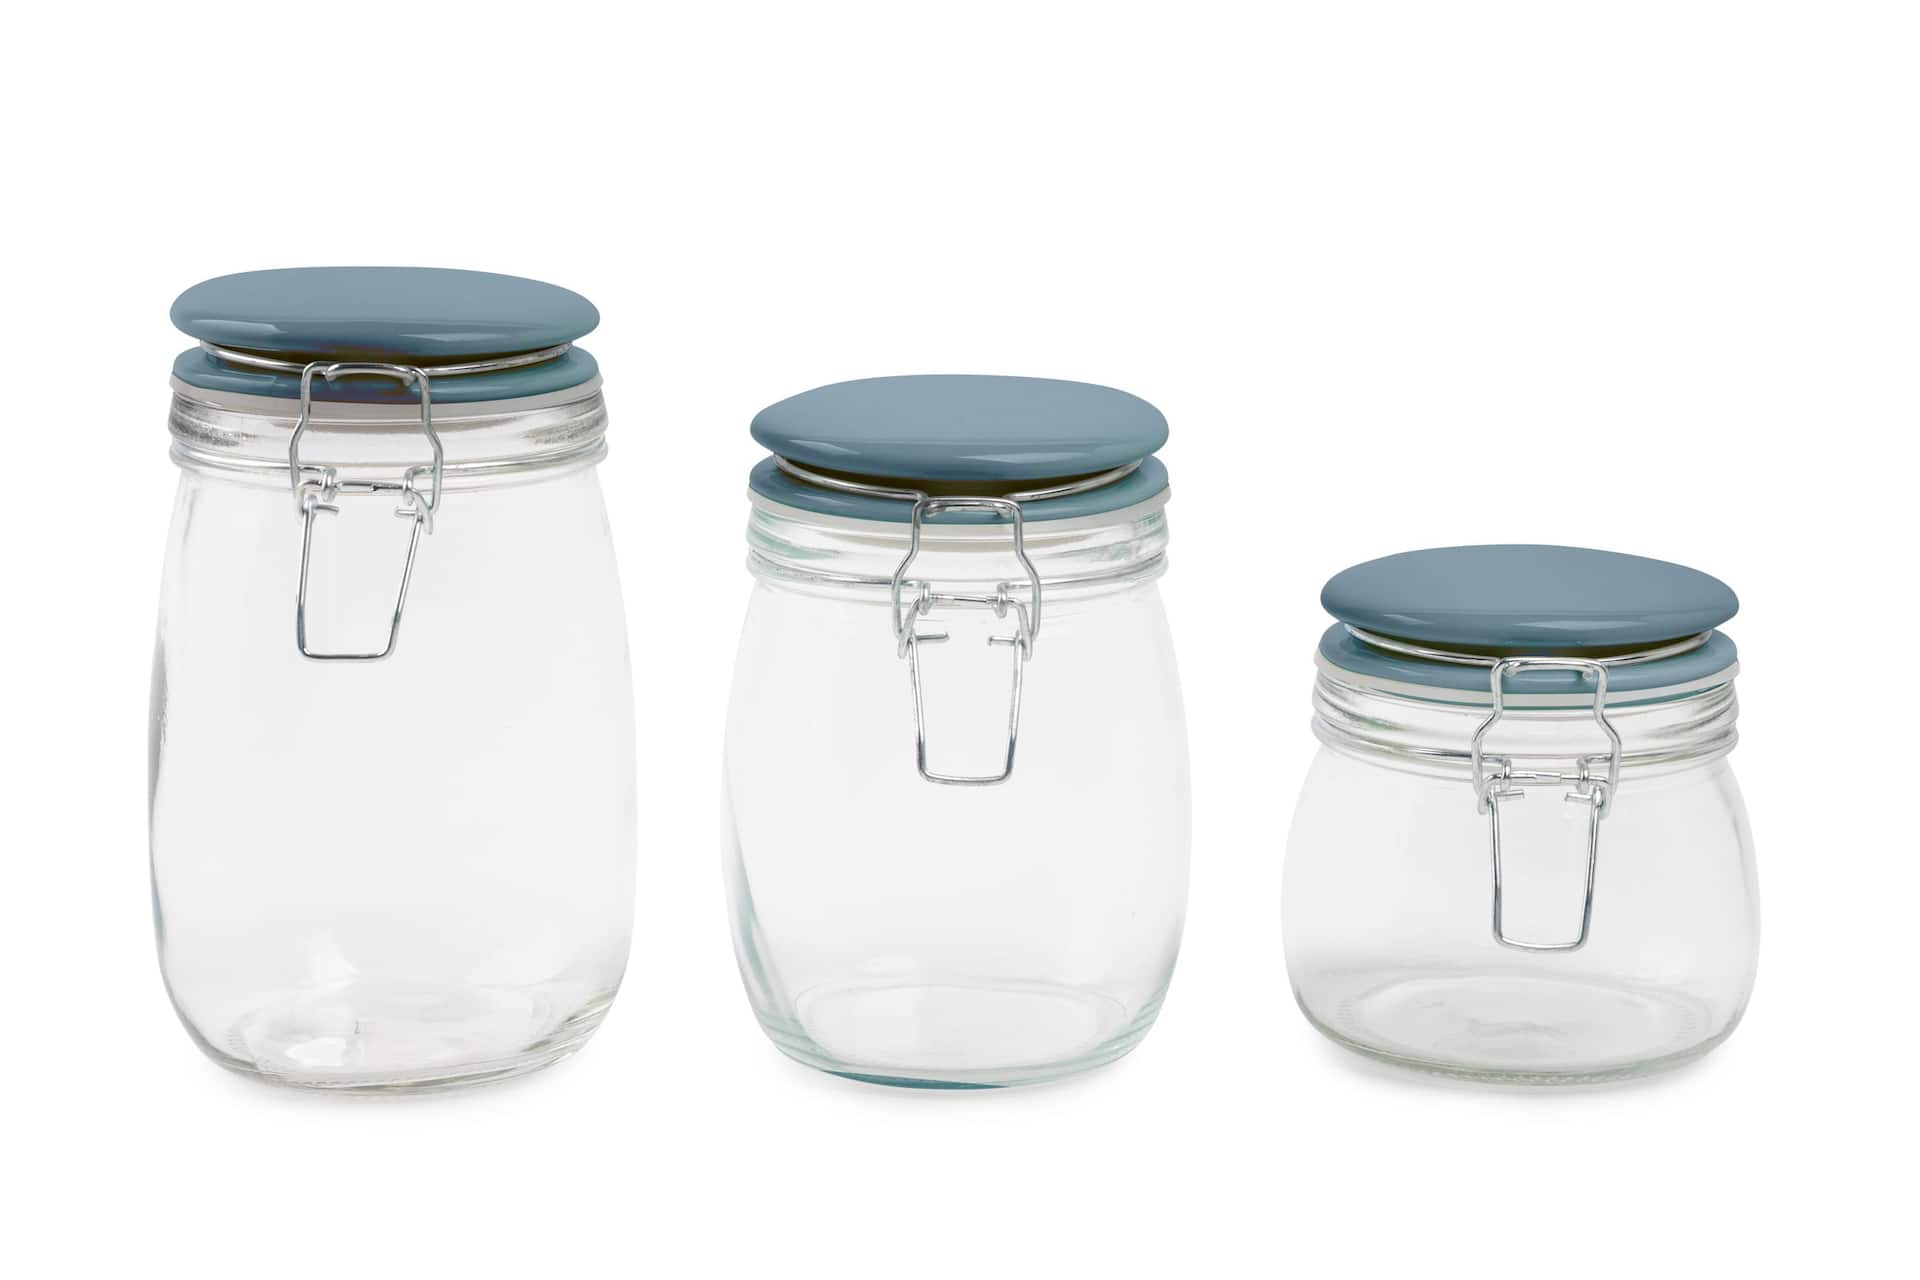 https://media-www.canadiantire.ca/product/living/kitchen/food-storage/1426417/master-chef-3pc-clamp-jar-set-4a9b6483-8beb-4088-aa75-ae7343b4c9bf-jpgrendition.jpg